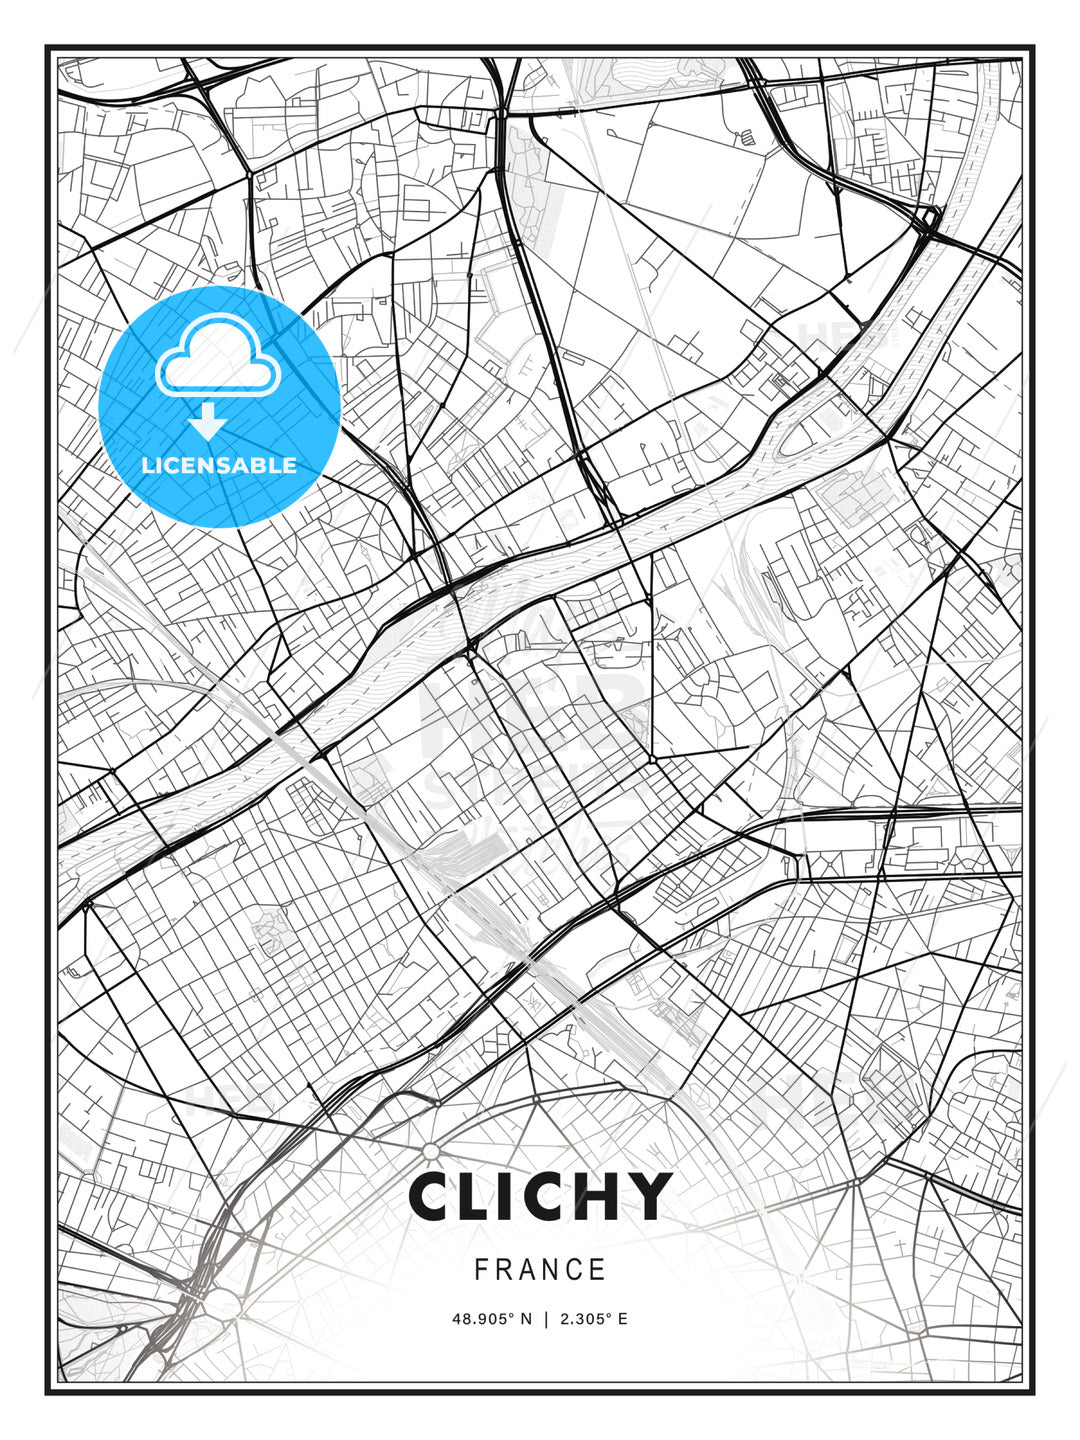 Clichy, France, Modern Print Template in Various Formats - HEBSTREITS Sketches